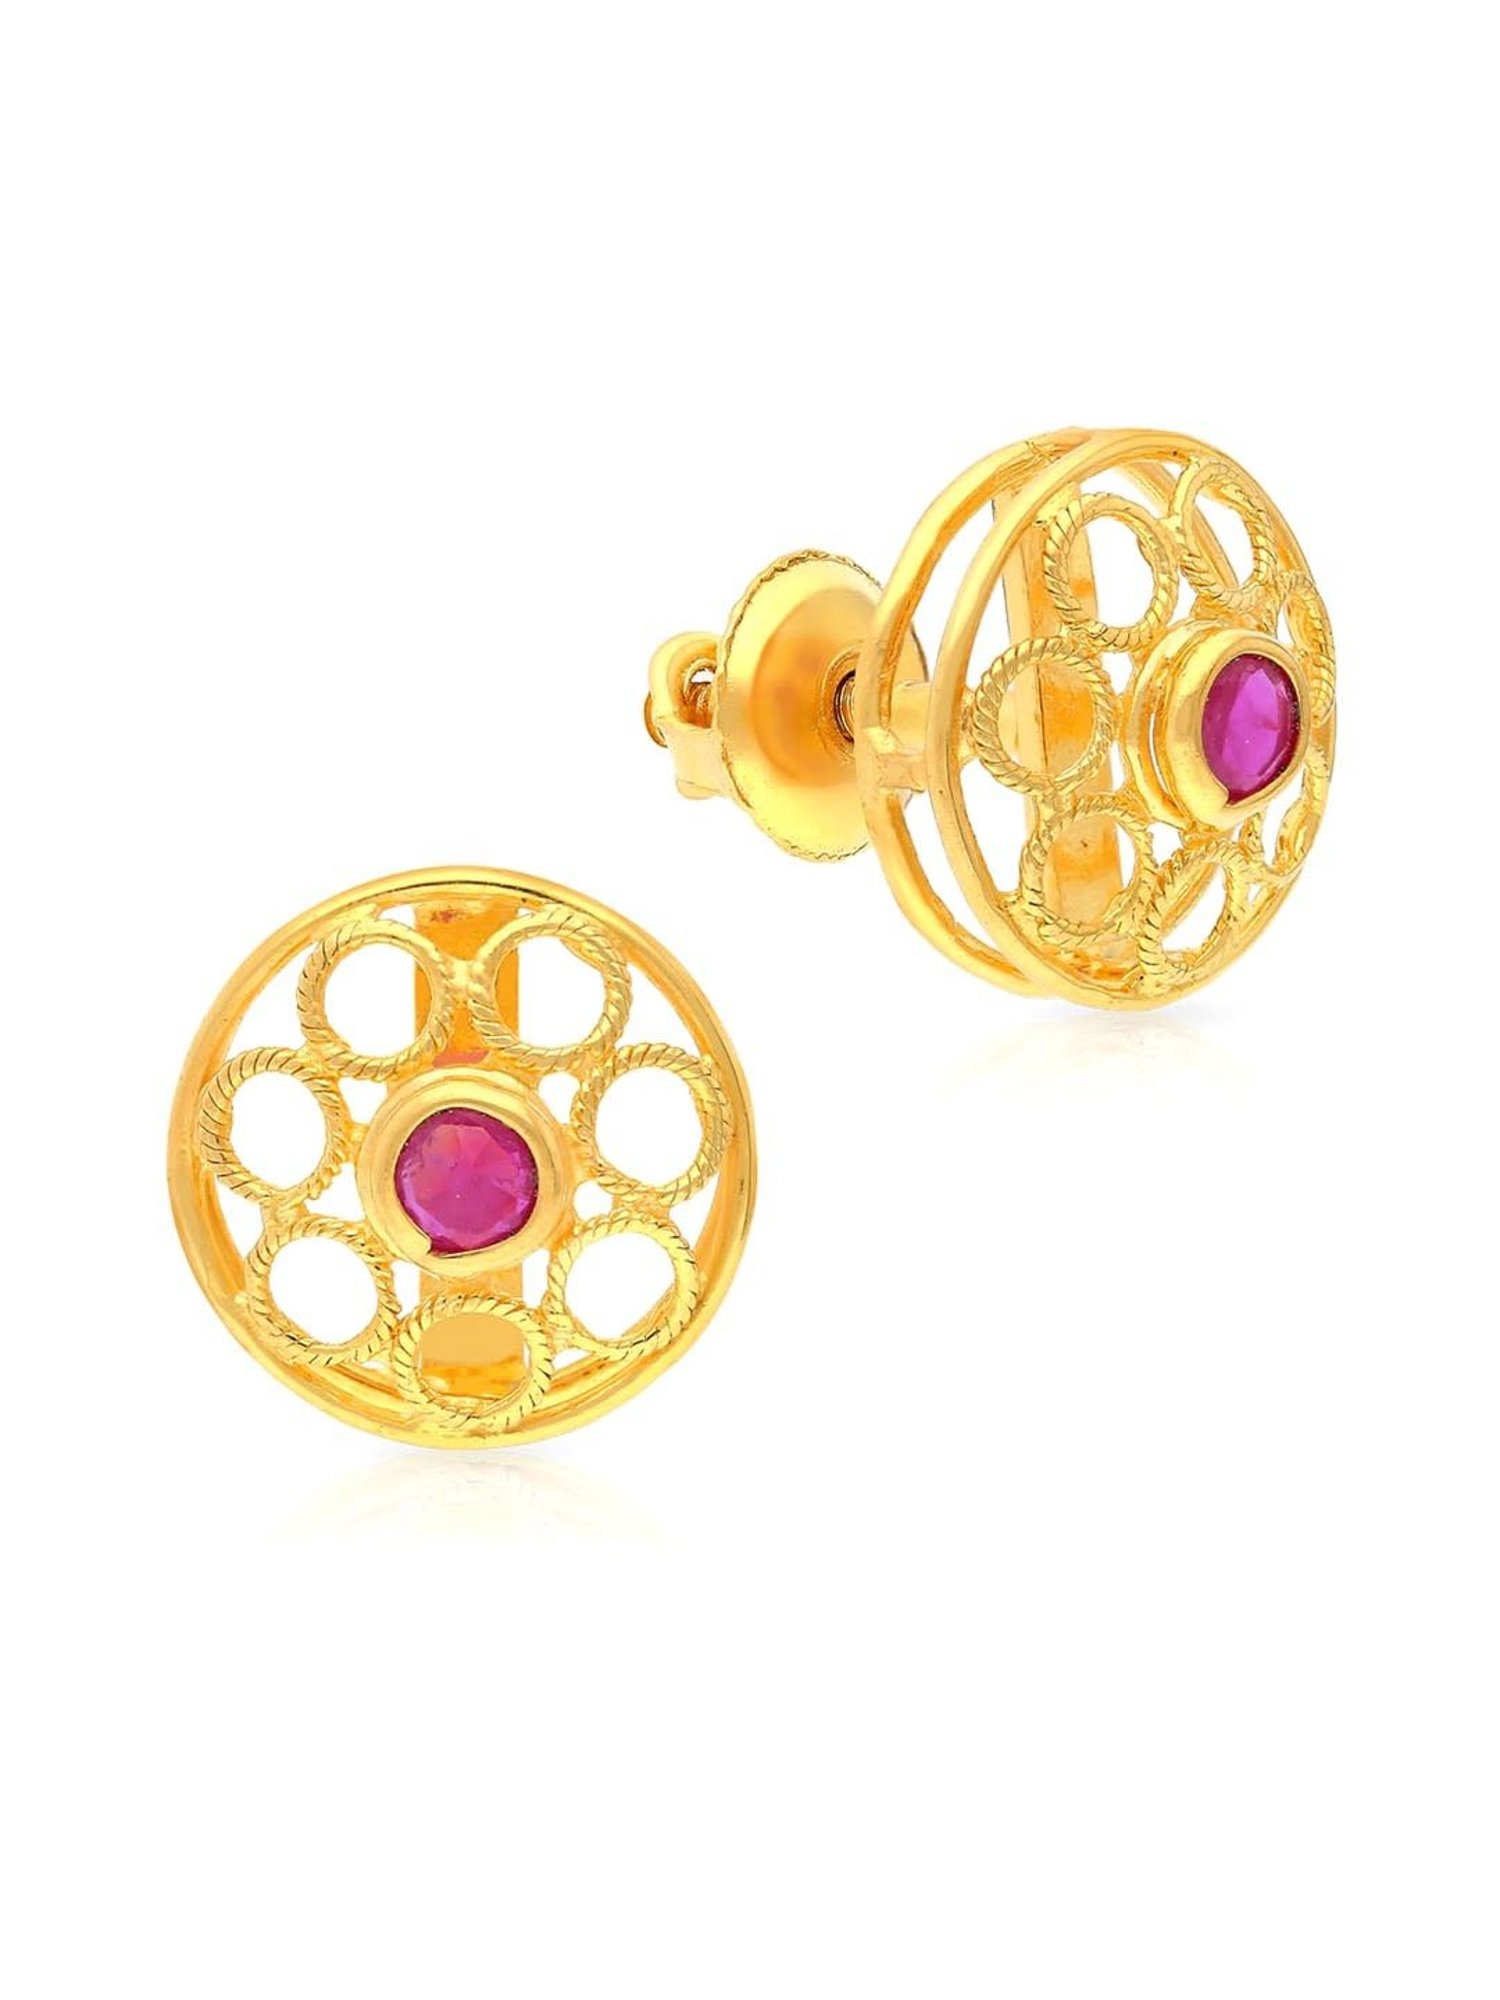 Buy Gold Tops 22k Yellow Gold Earrings Stud Handmade Yellow Online in India   Etsy